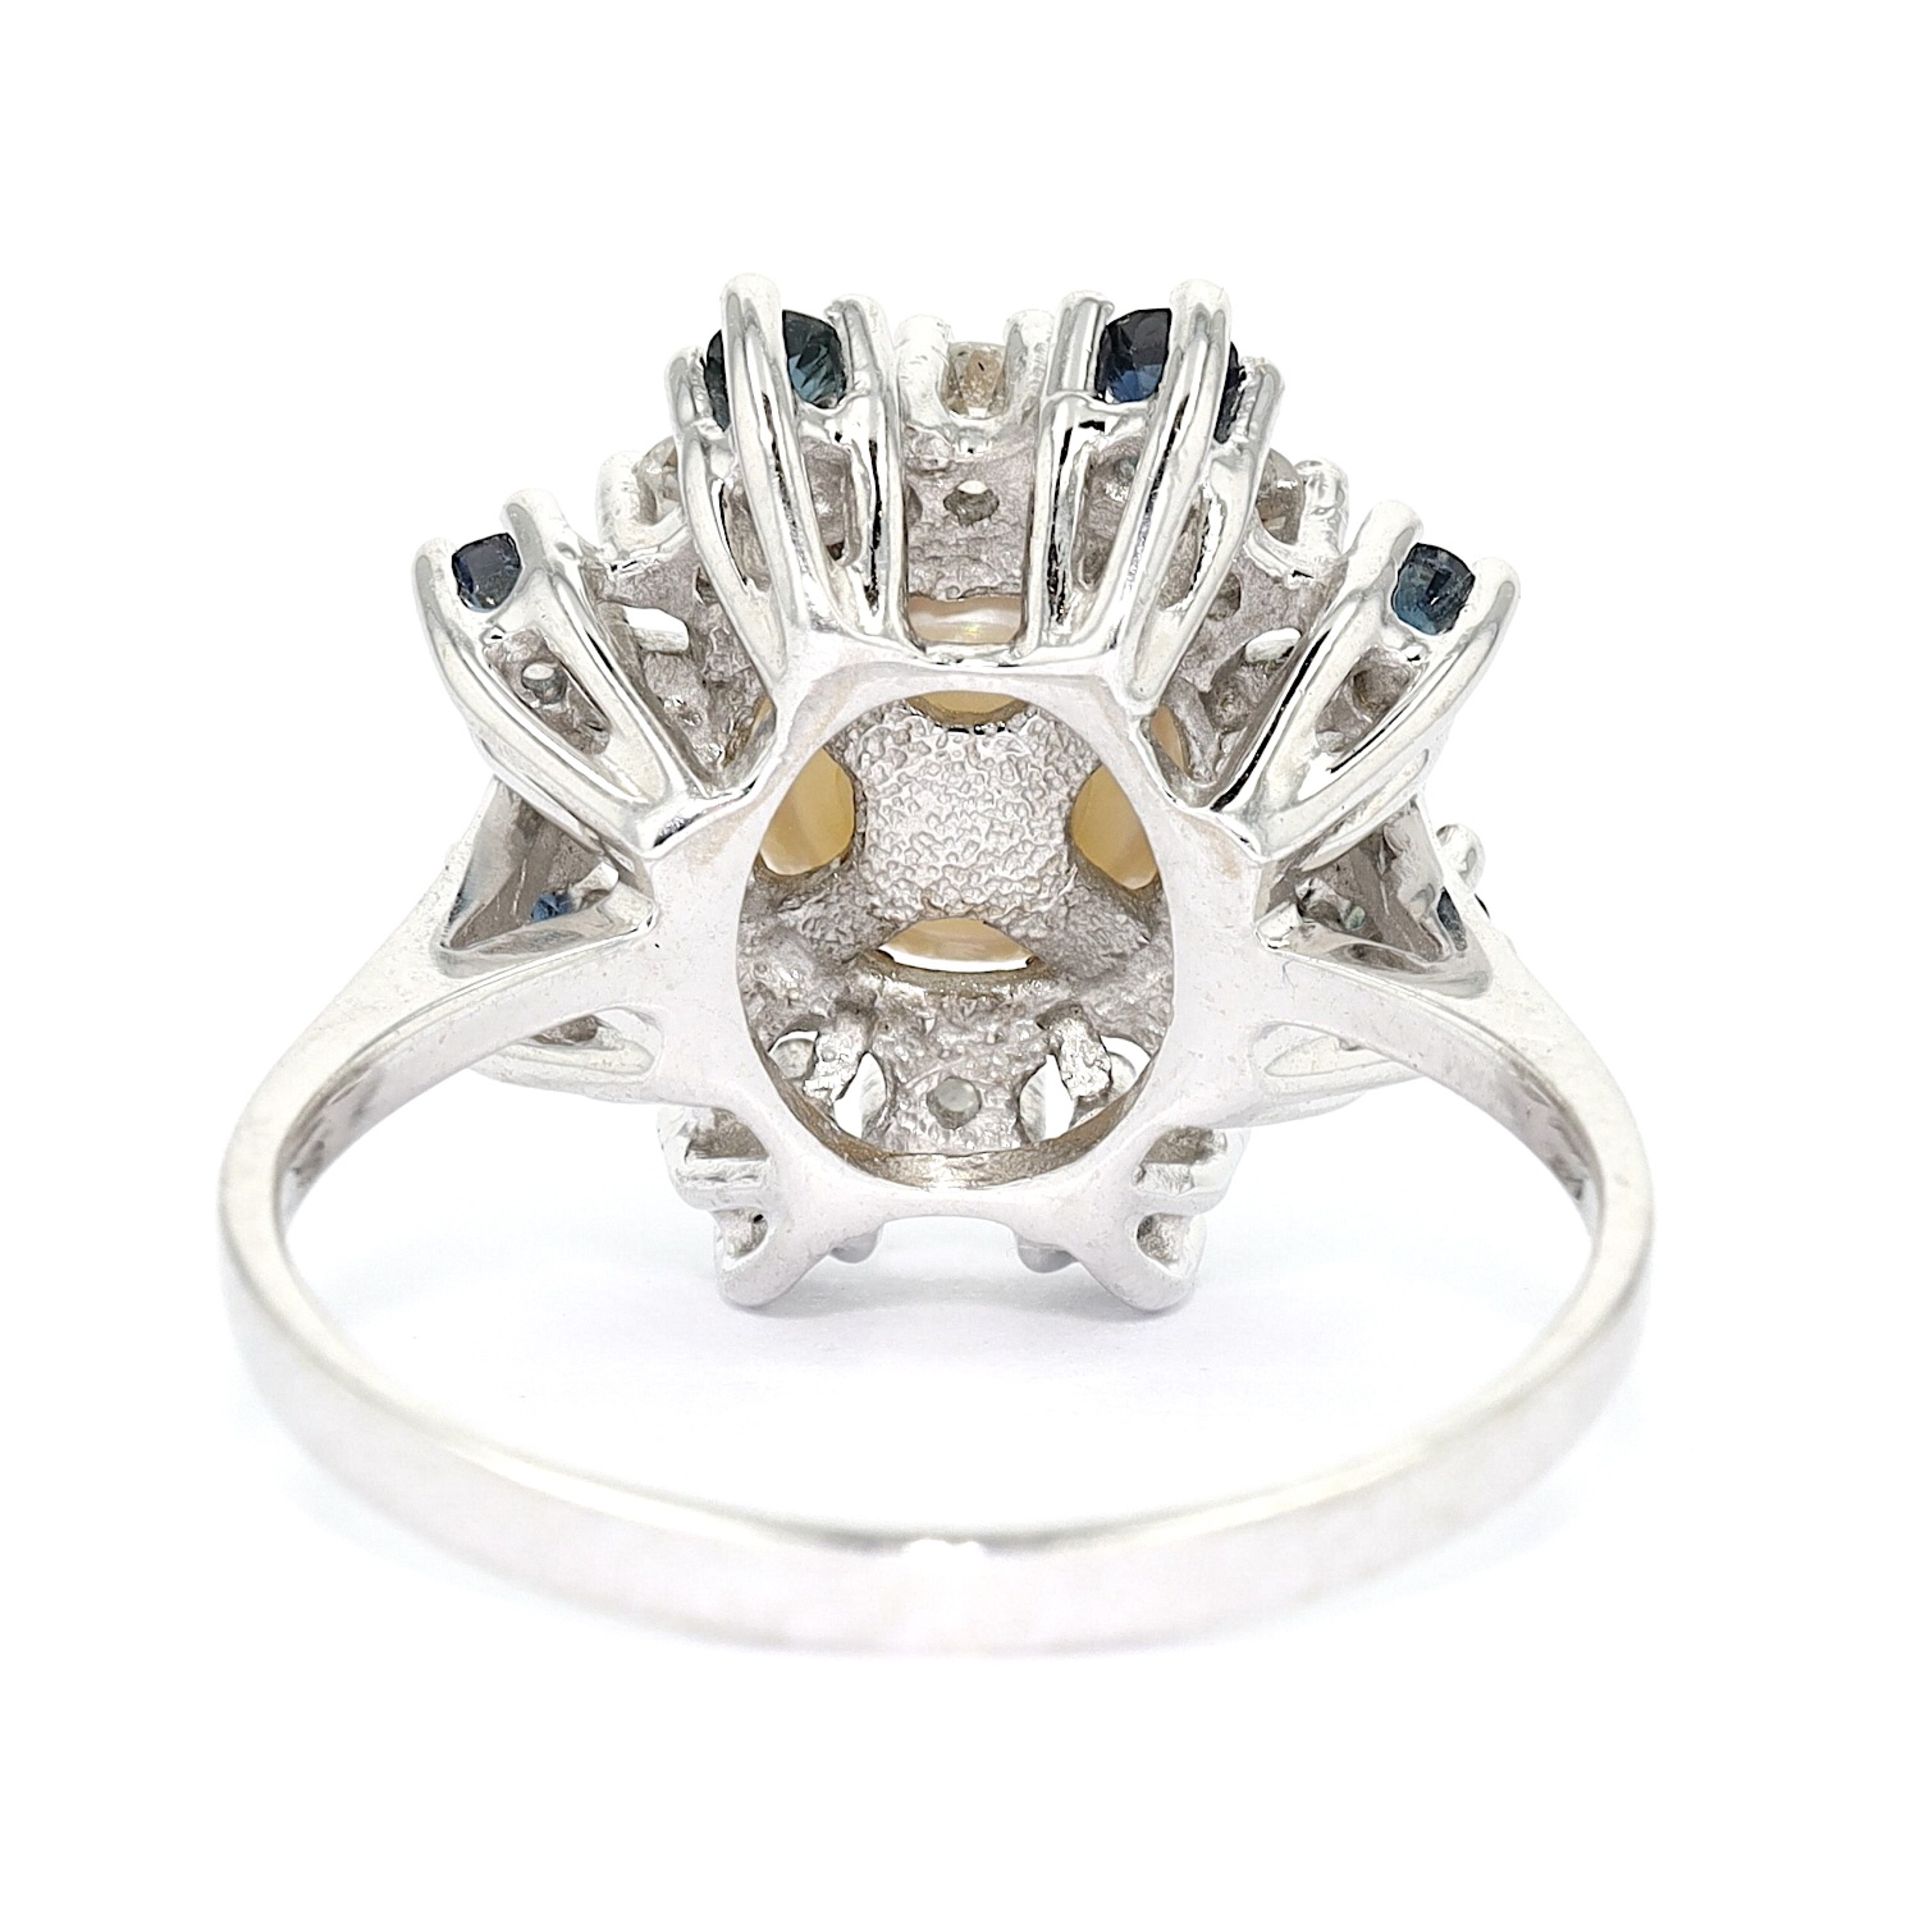 Ring 585 gold with cultured pearl, diamonds and sapphires - Image 5 of 6